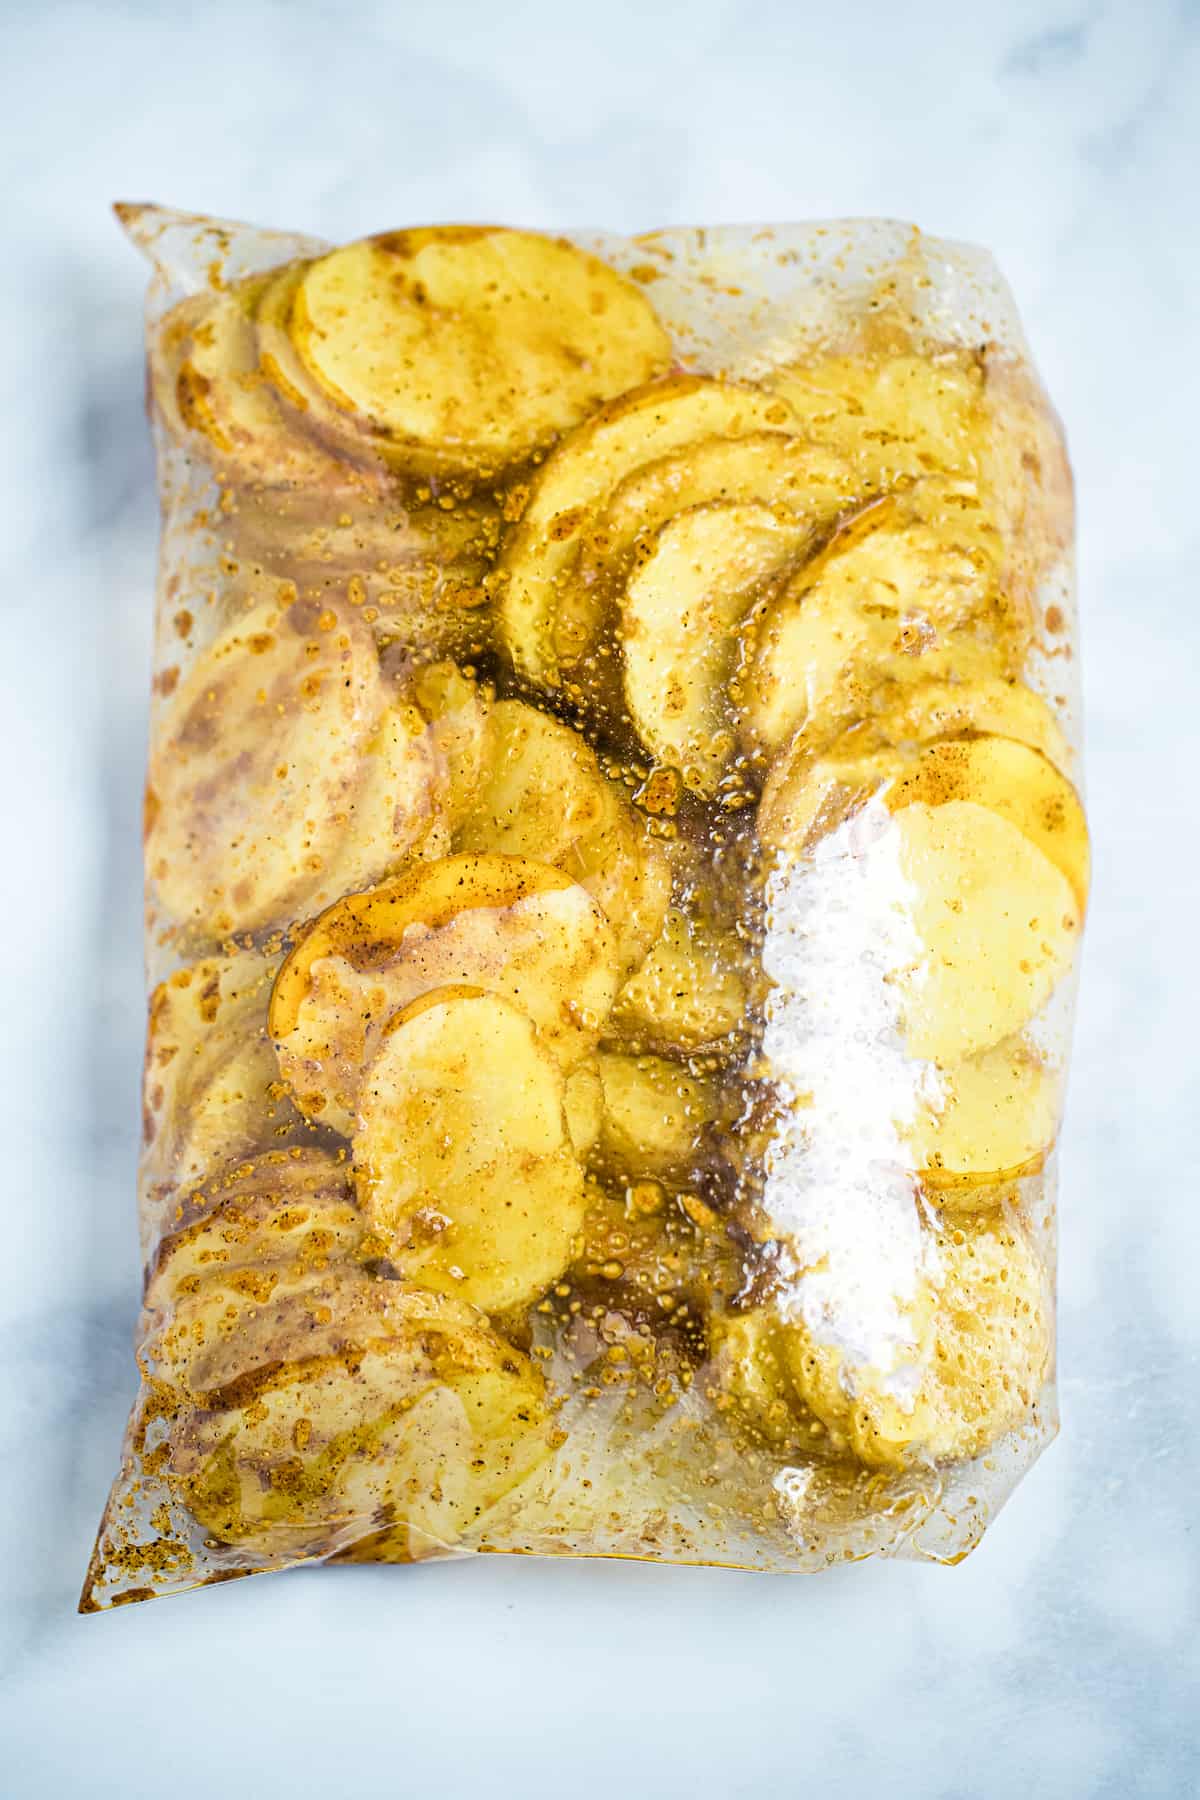 Baked Potato Slices - Cook2eatwell